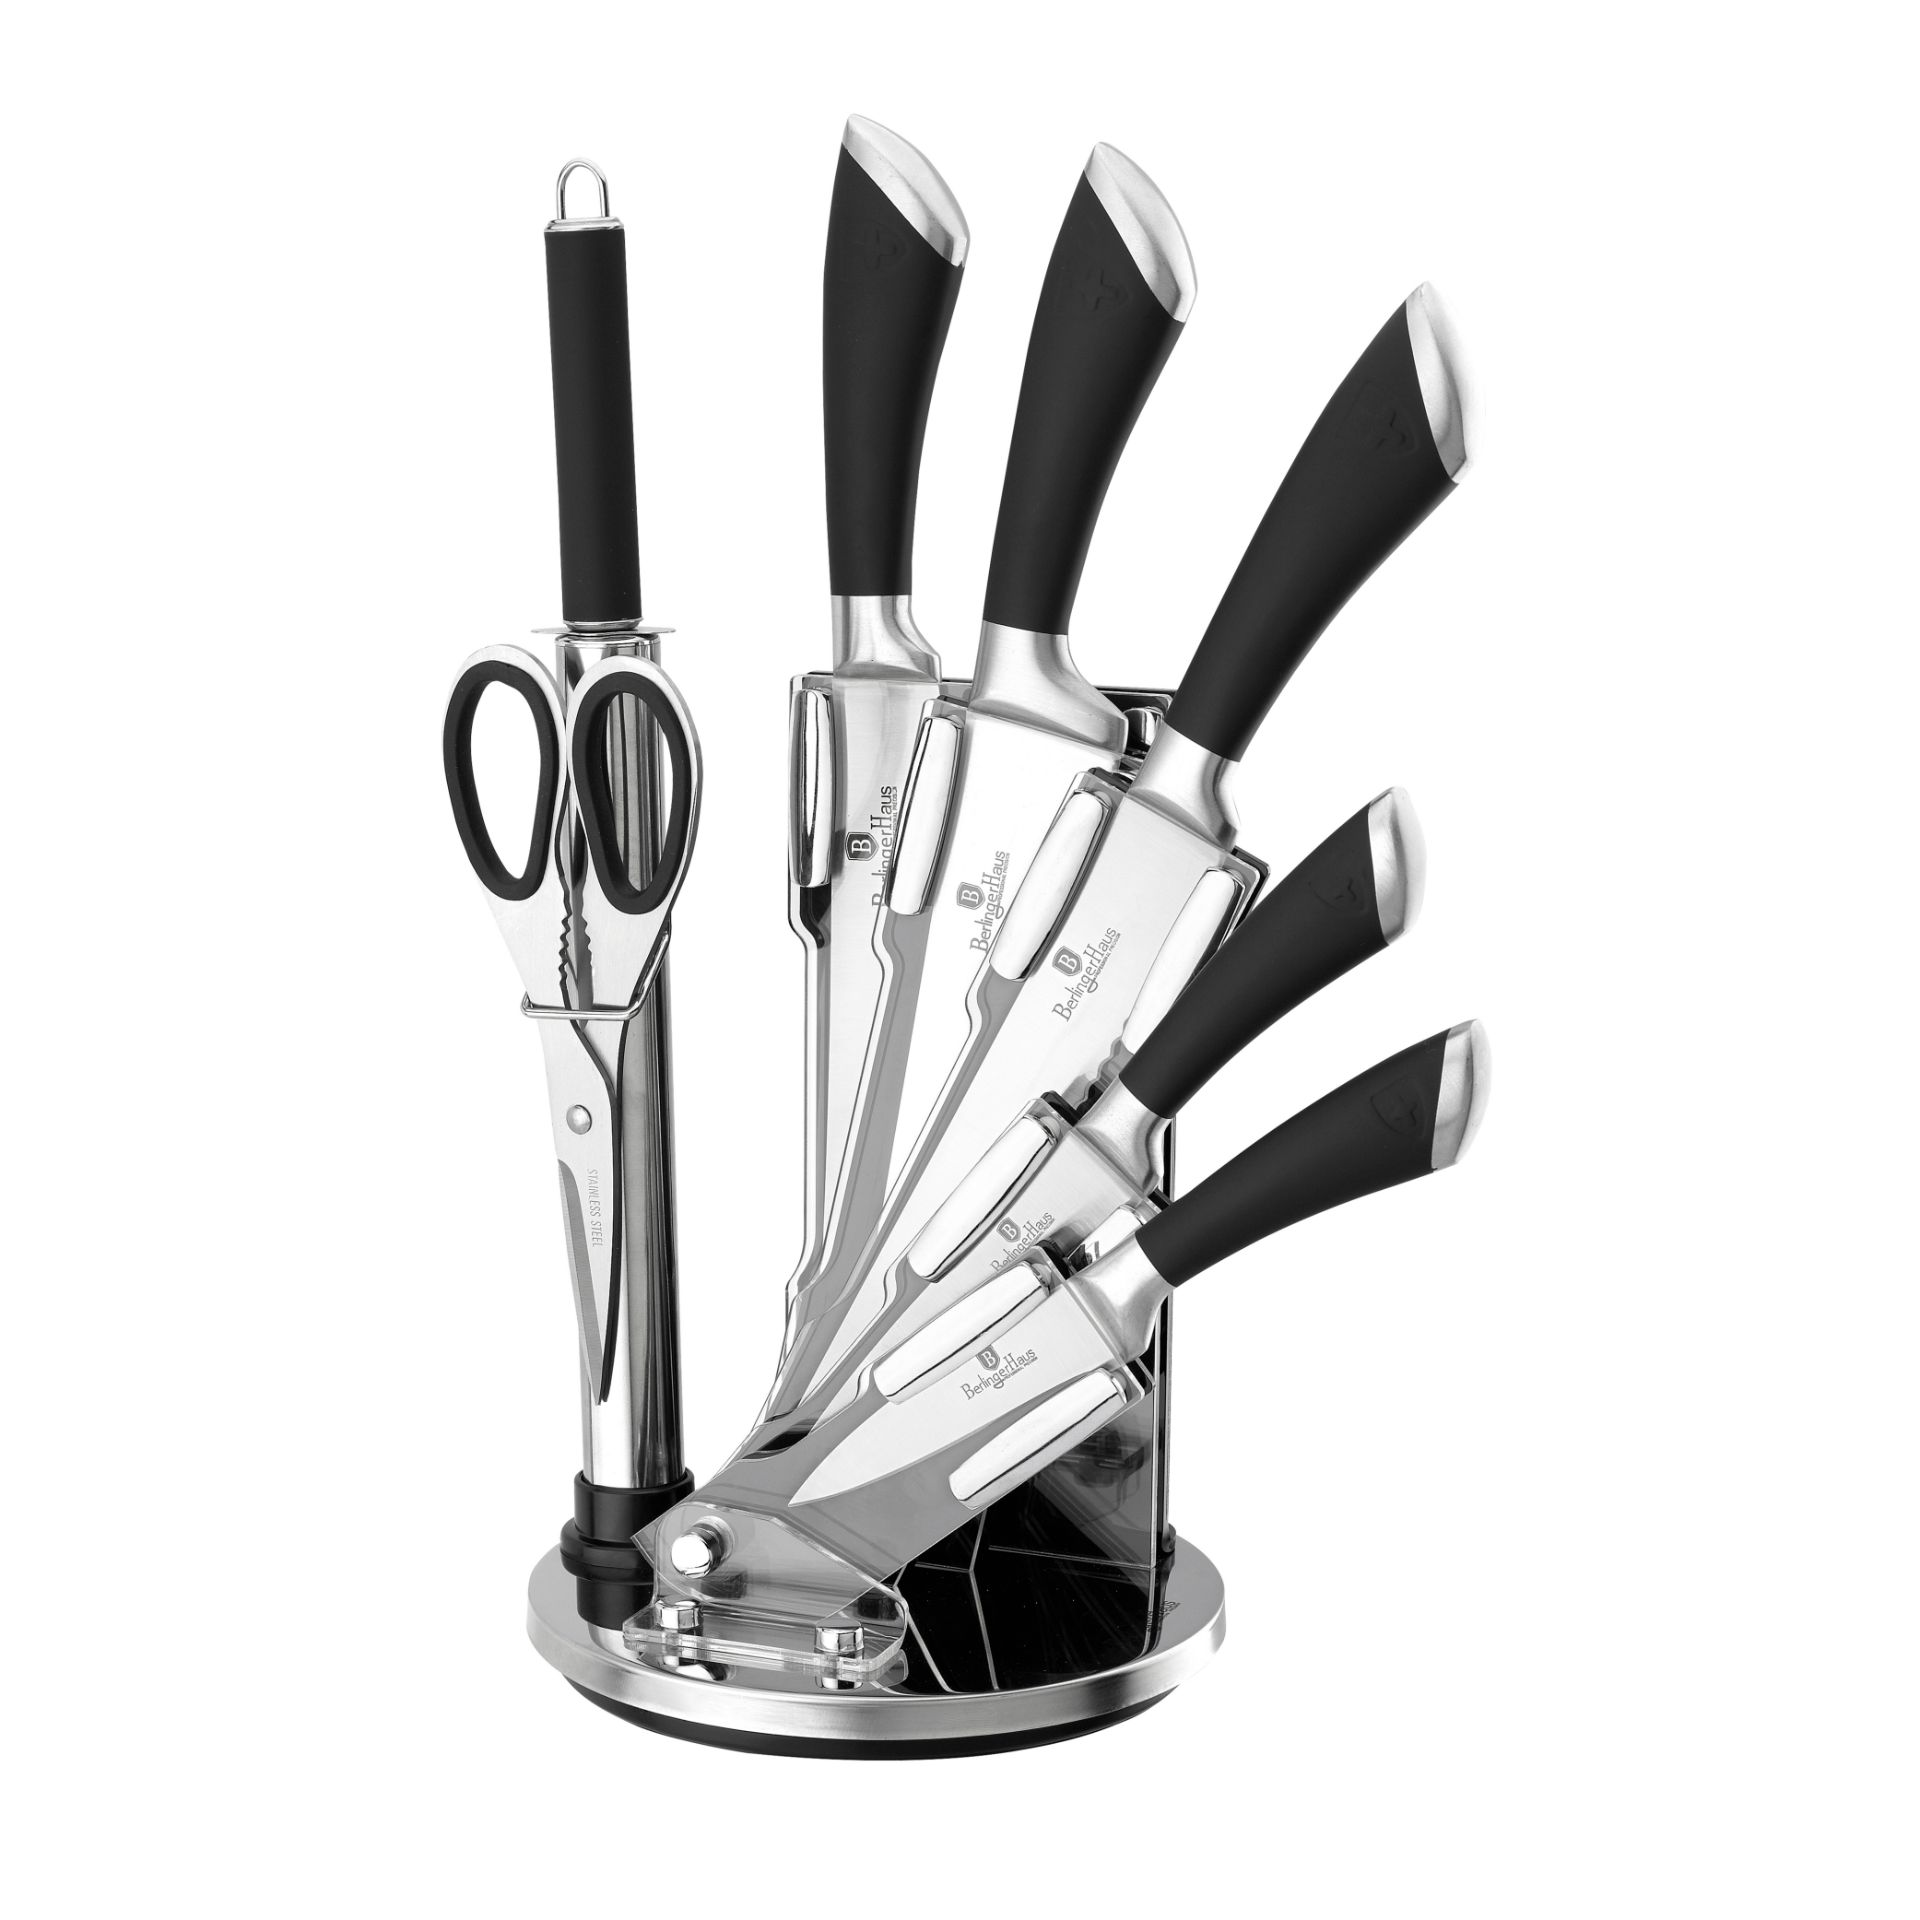 V Brand New Kitchen Line Switzerland 8 Piece Knife Set With Stand Includes 6.5" Cleaver/8" Chef